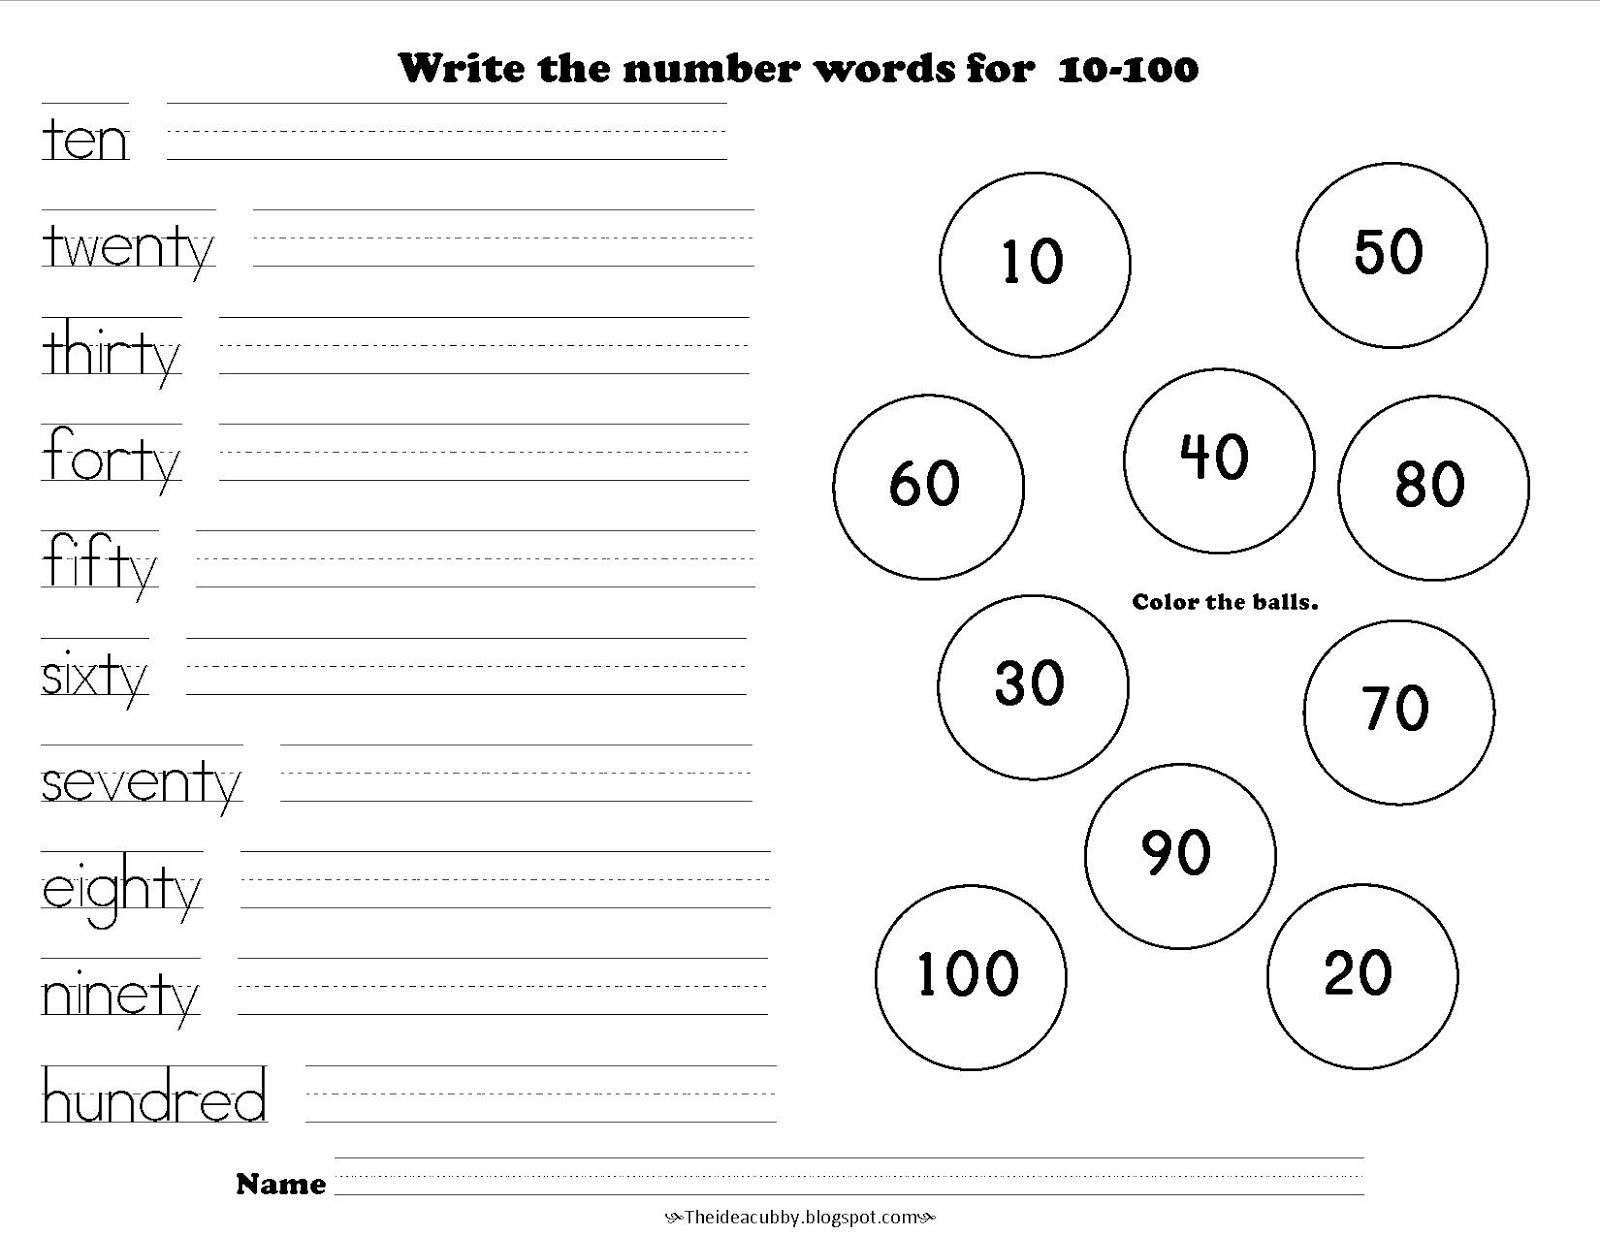 trace-write-and-fill-in-numbers-1-20-30-worksheets-3-counting-pages-trace-the-numbers-w